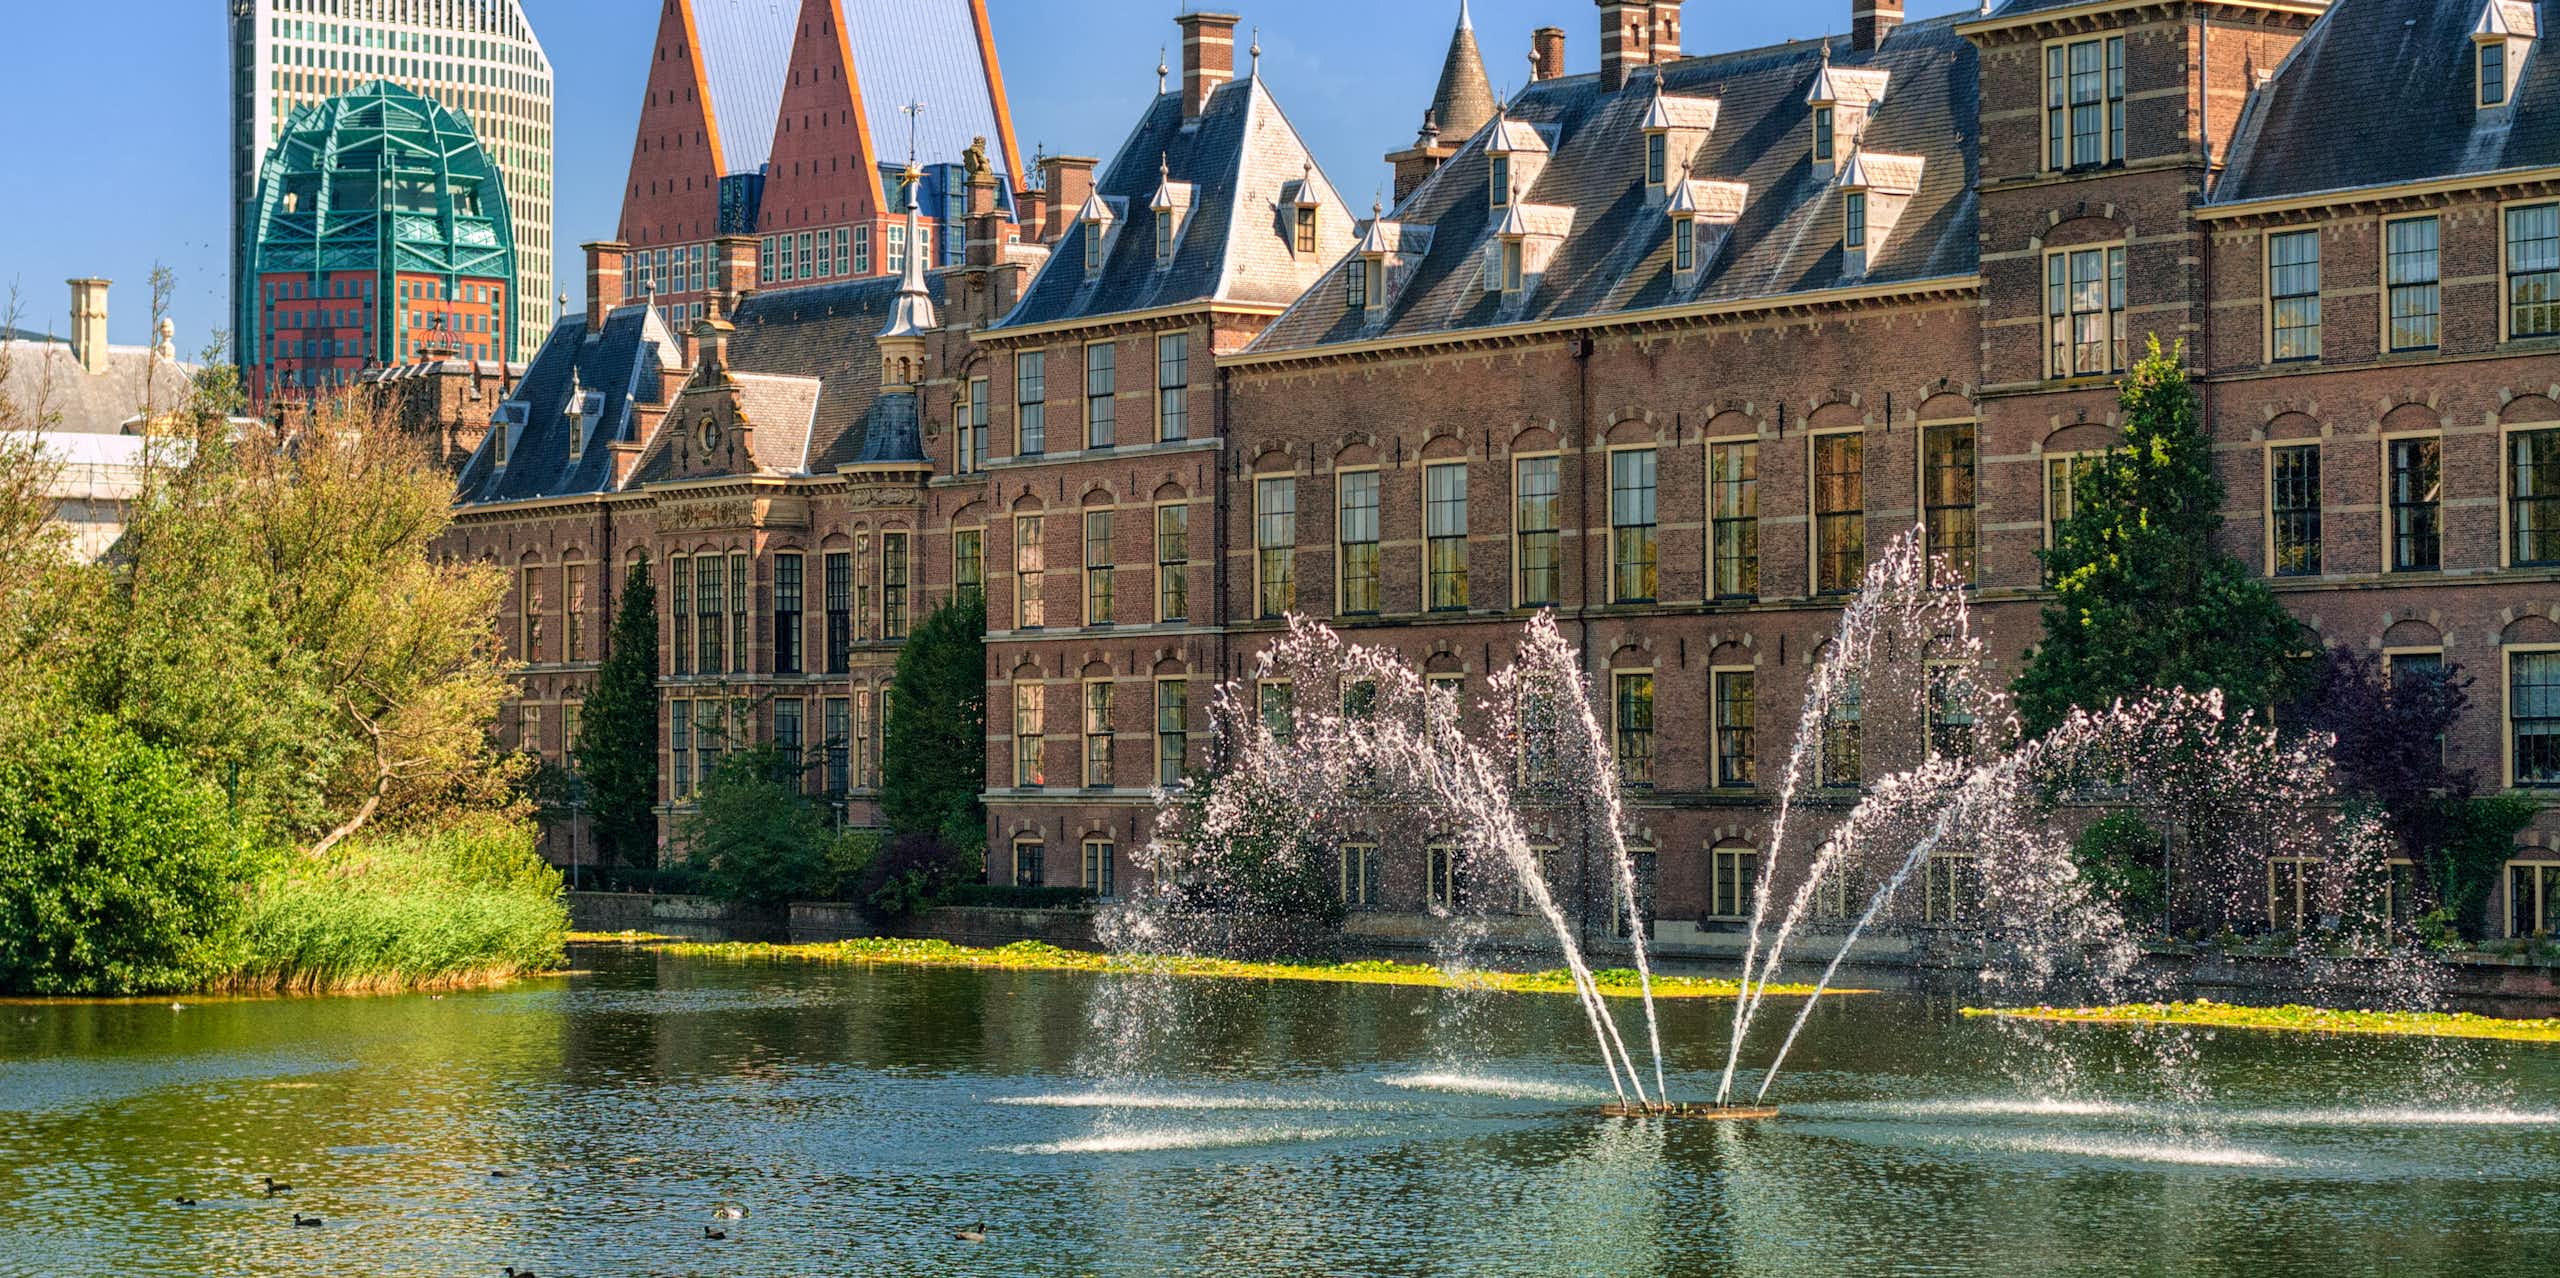 Binnenhof Palace big grand building in Netherlands with water fountain and lake in foreground, blue sky